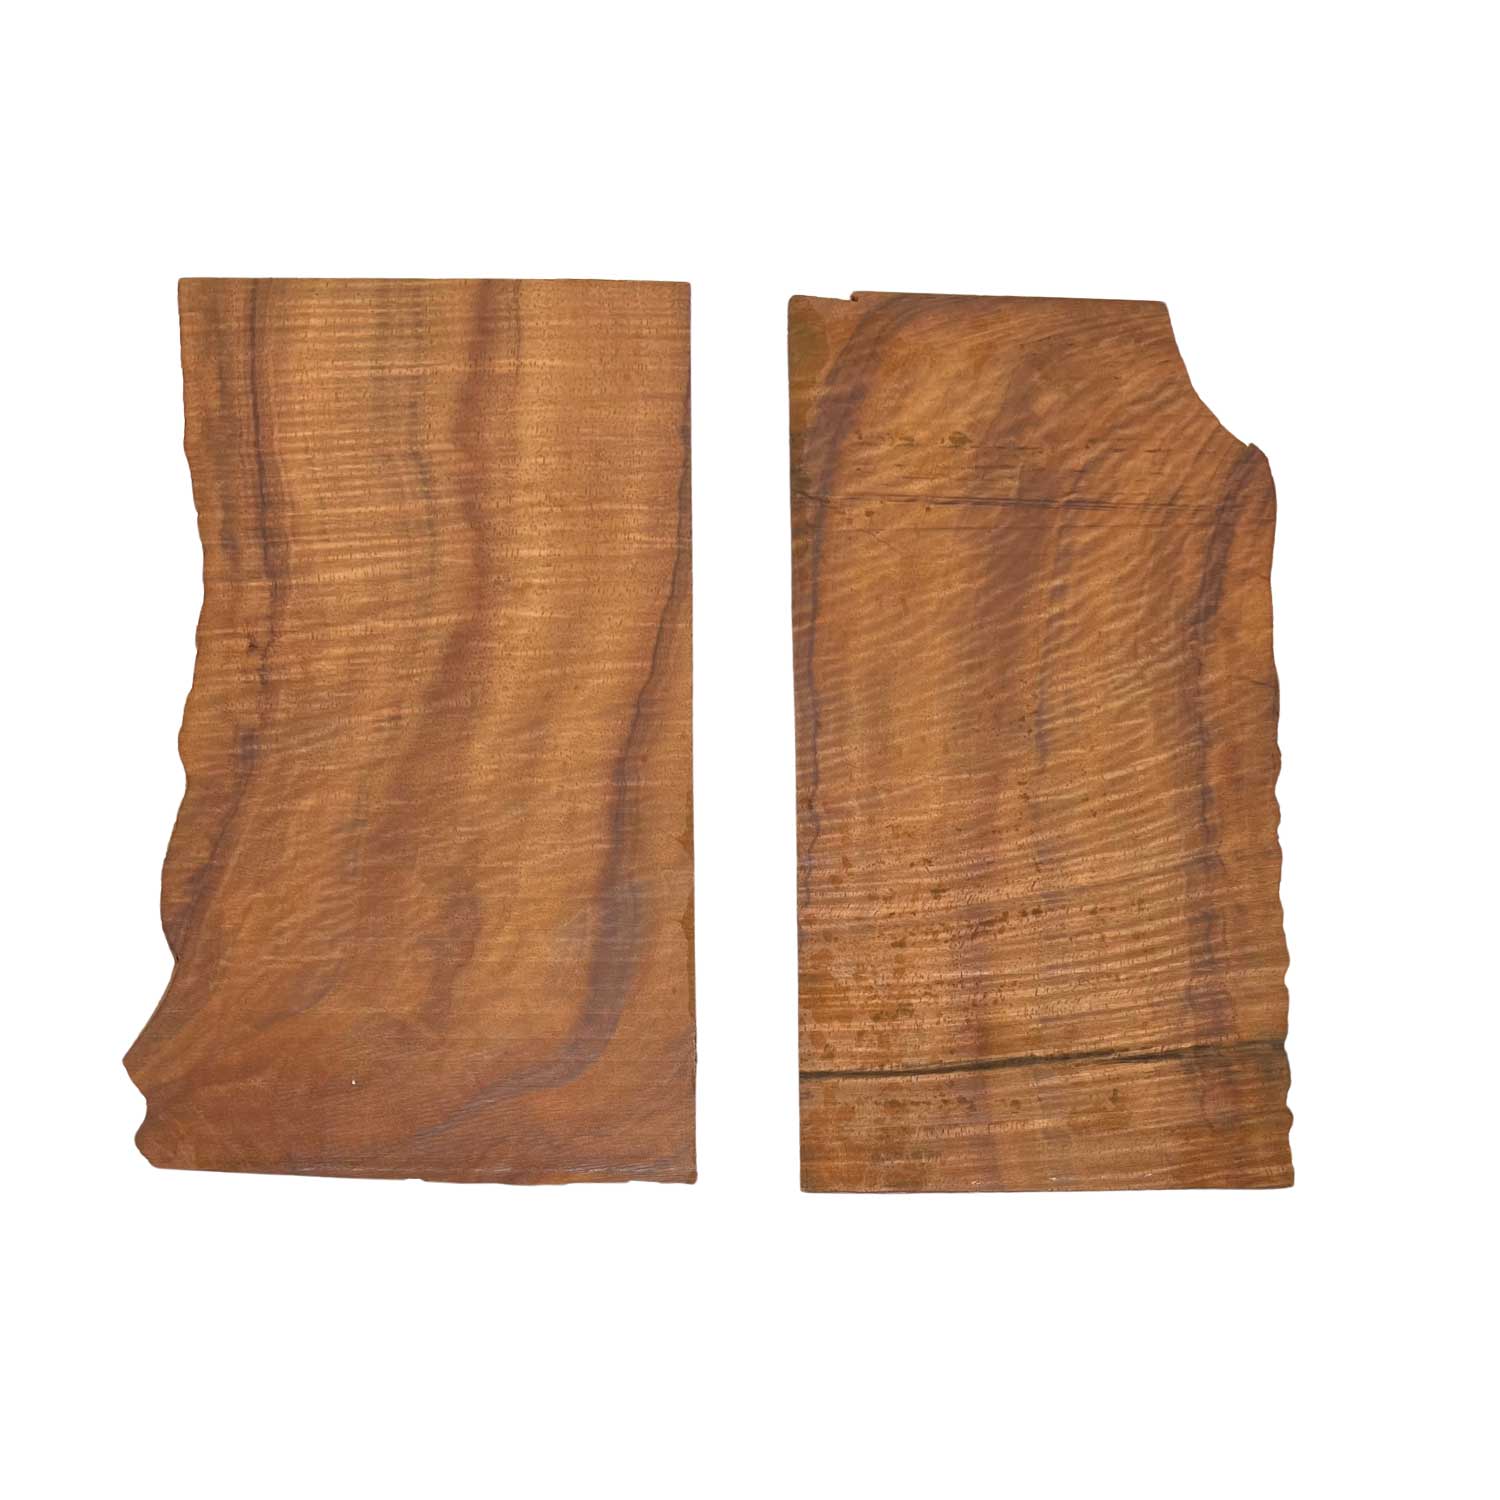 Flame Koa Bookmatched Thin Lumber - 2 pieces 